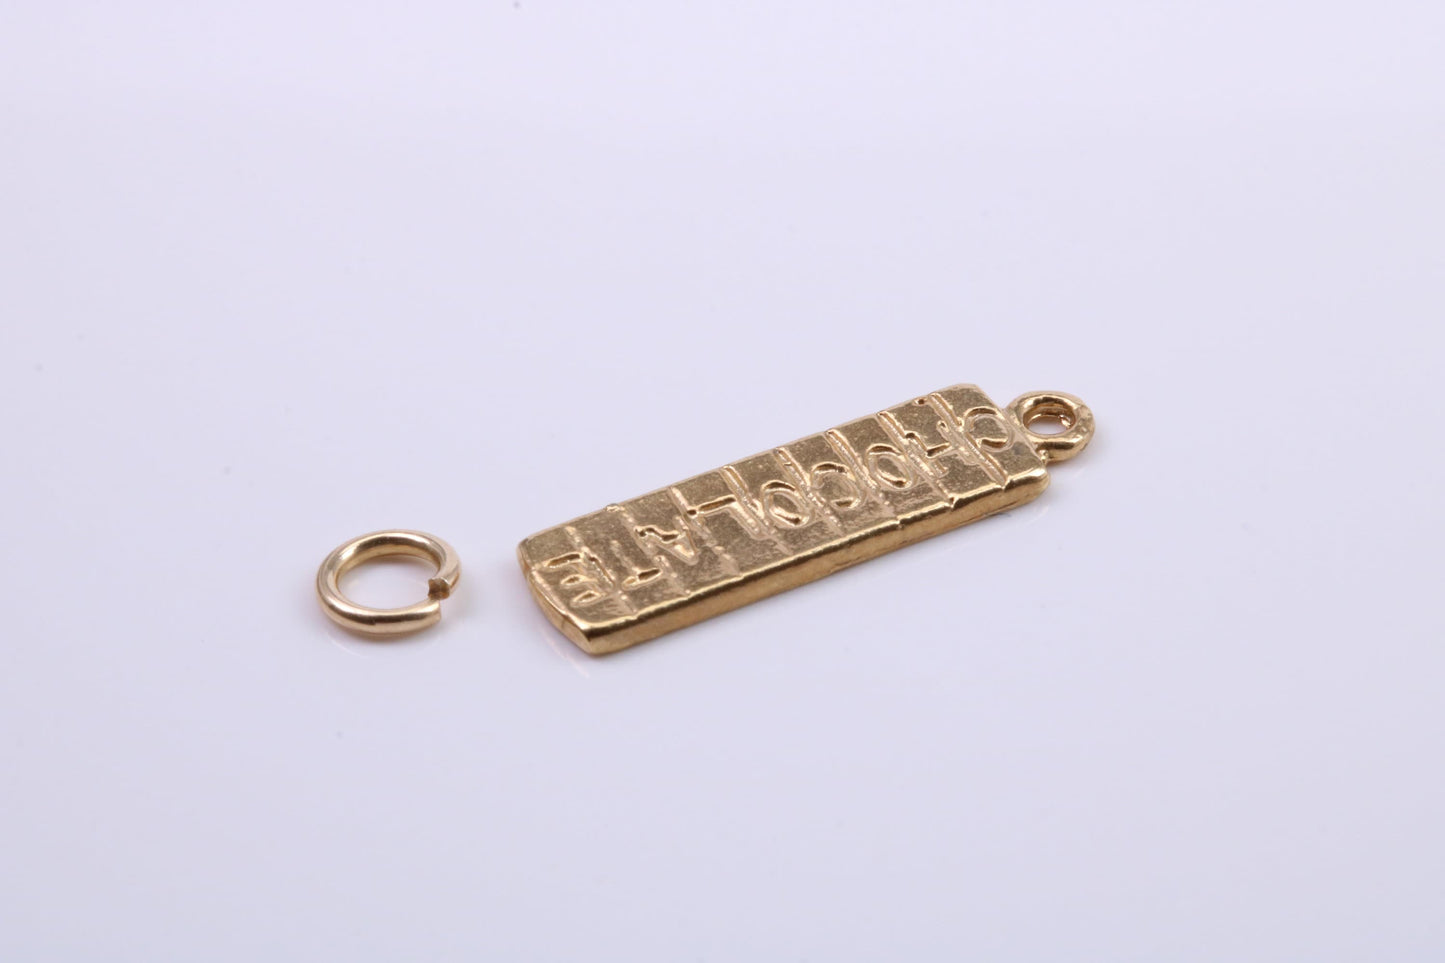 Chocolate Bar Charm, Traditional Charm, Made from Solid 9ct Yellow Gold, British Hallmarked, Complete with Attachment Link